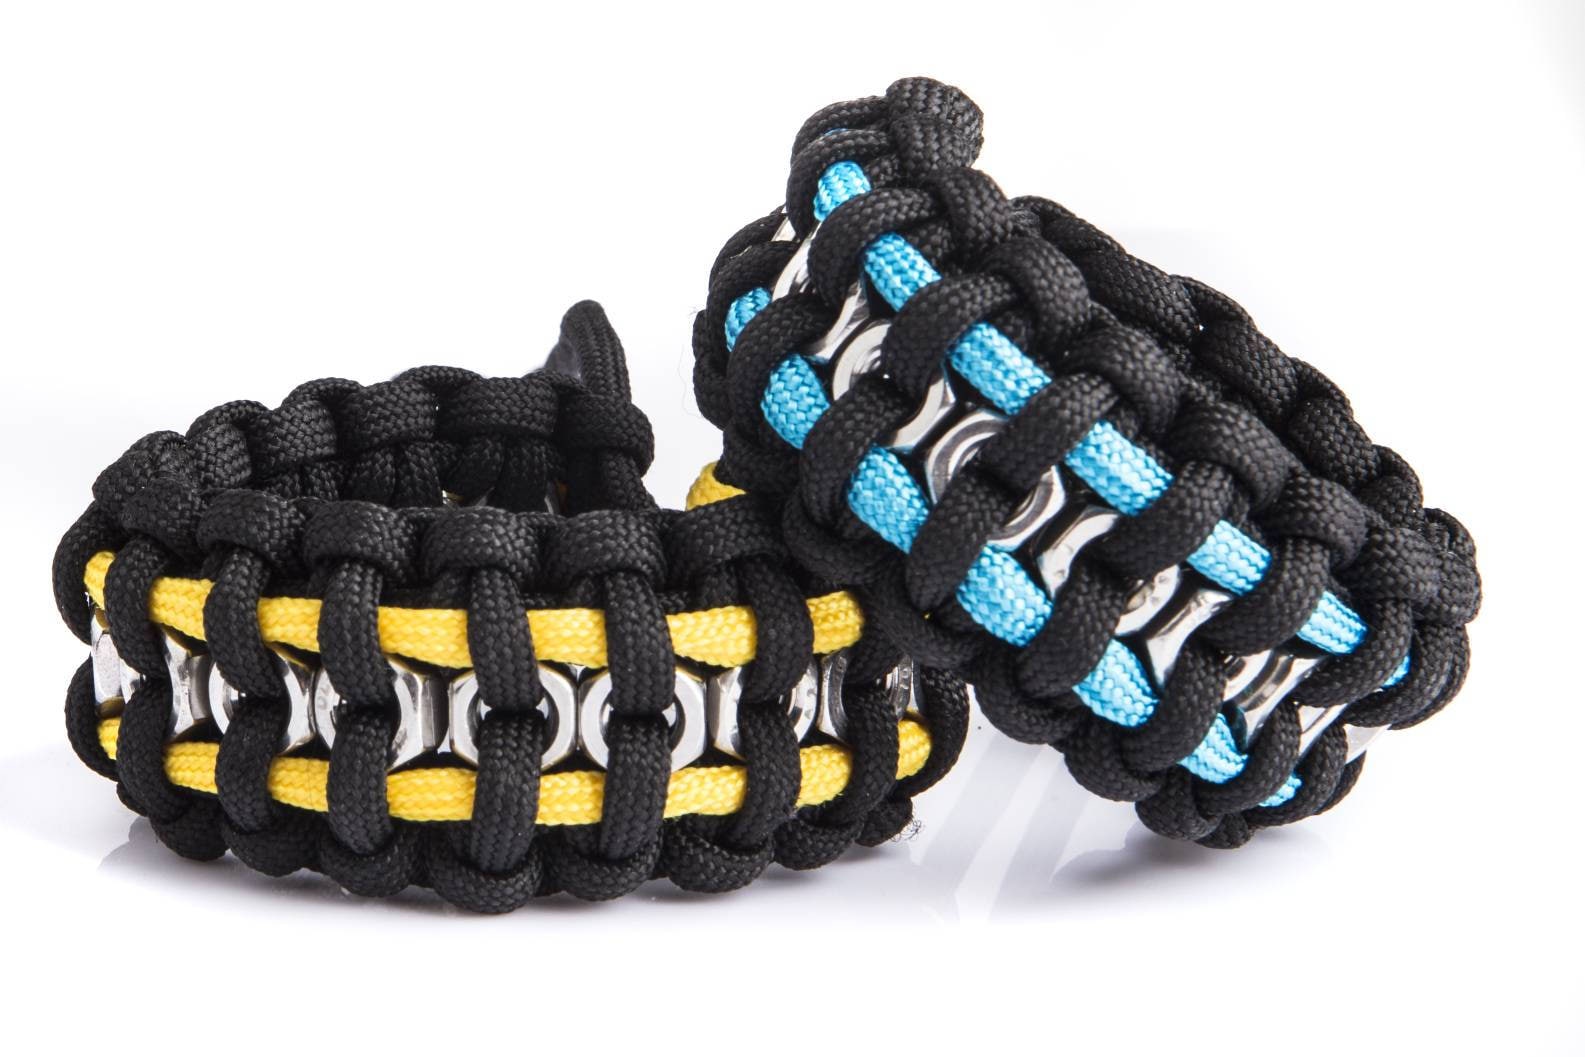 Paracord Bracelet Survival Wristband With Stainless Steel Hex Nuts  Adjustable Colourful Unisex 